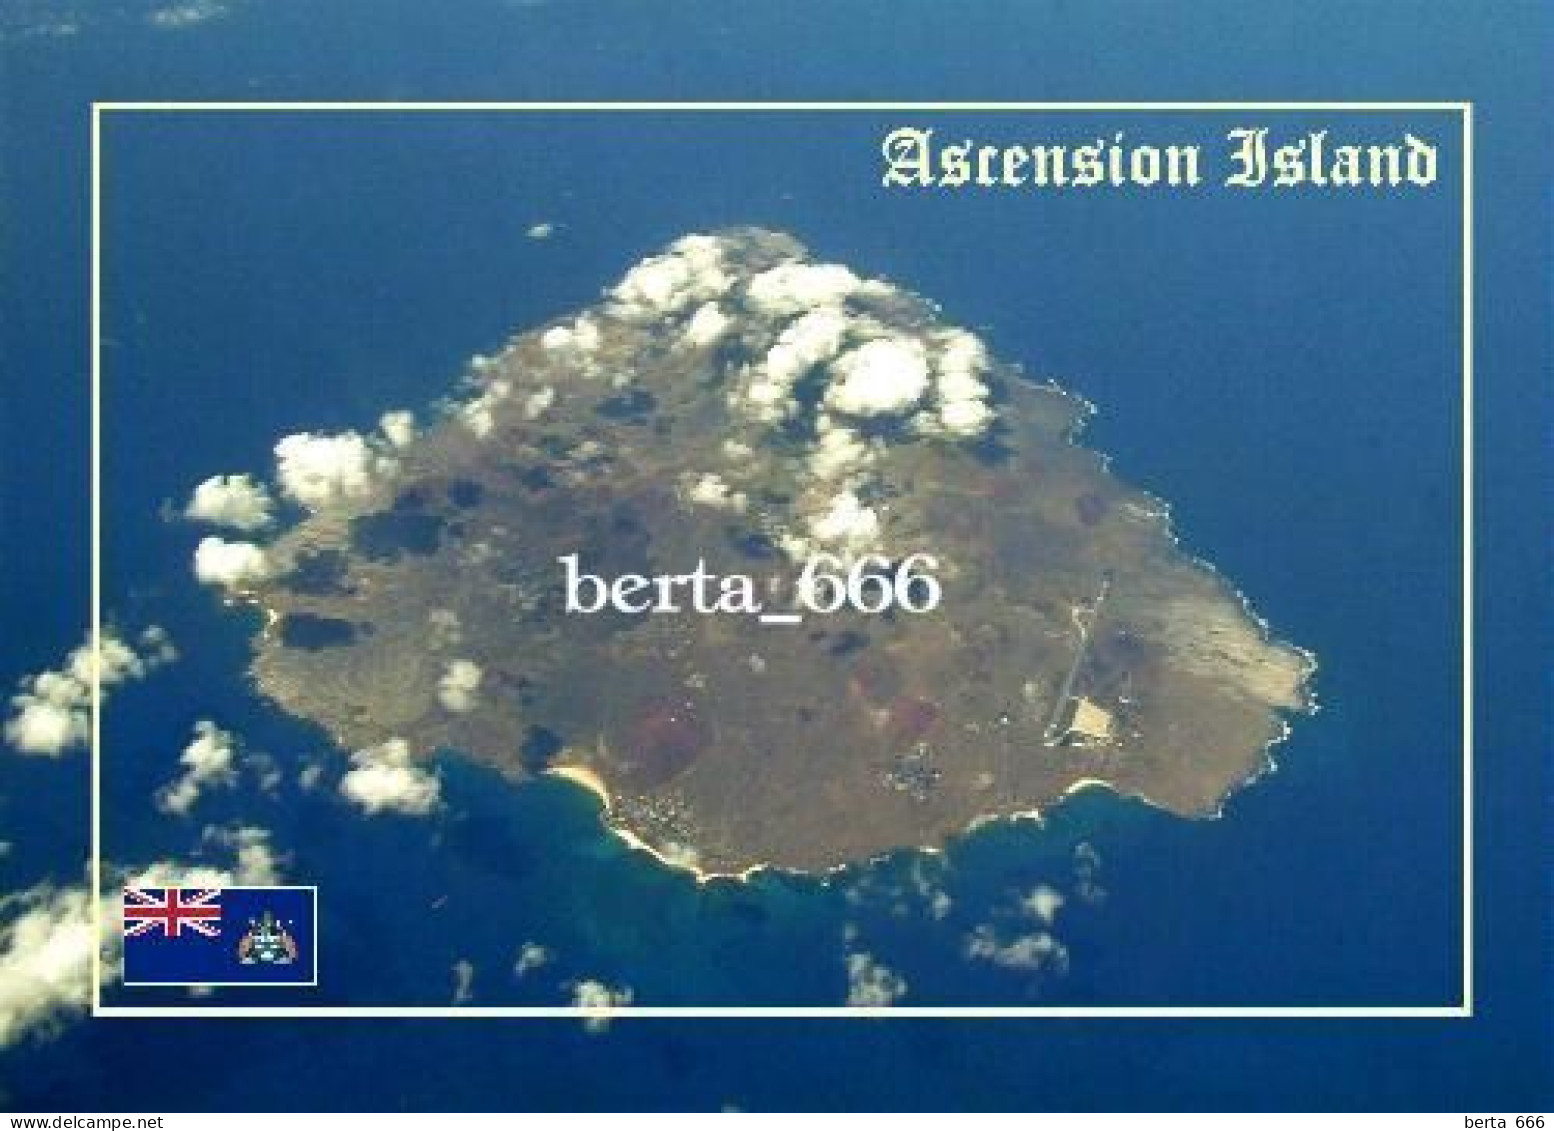 Ascension Island Aerial View New Postcard - Ascension Island